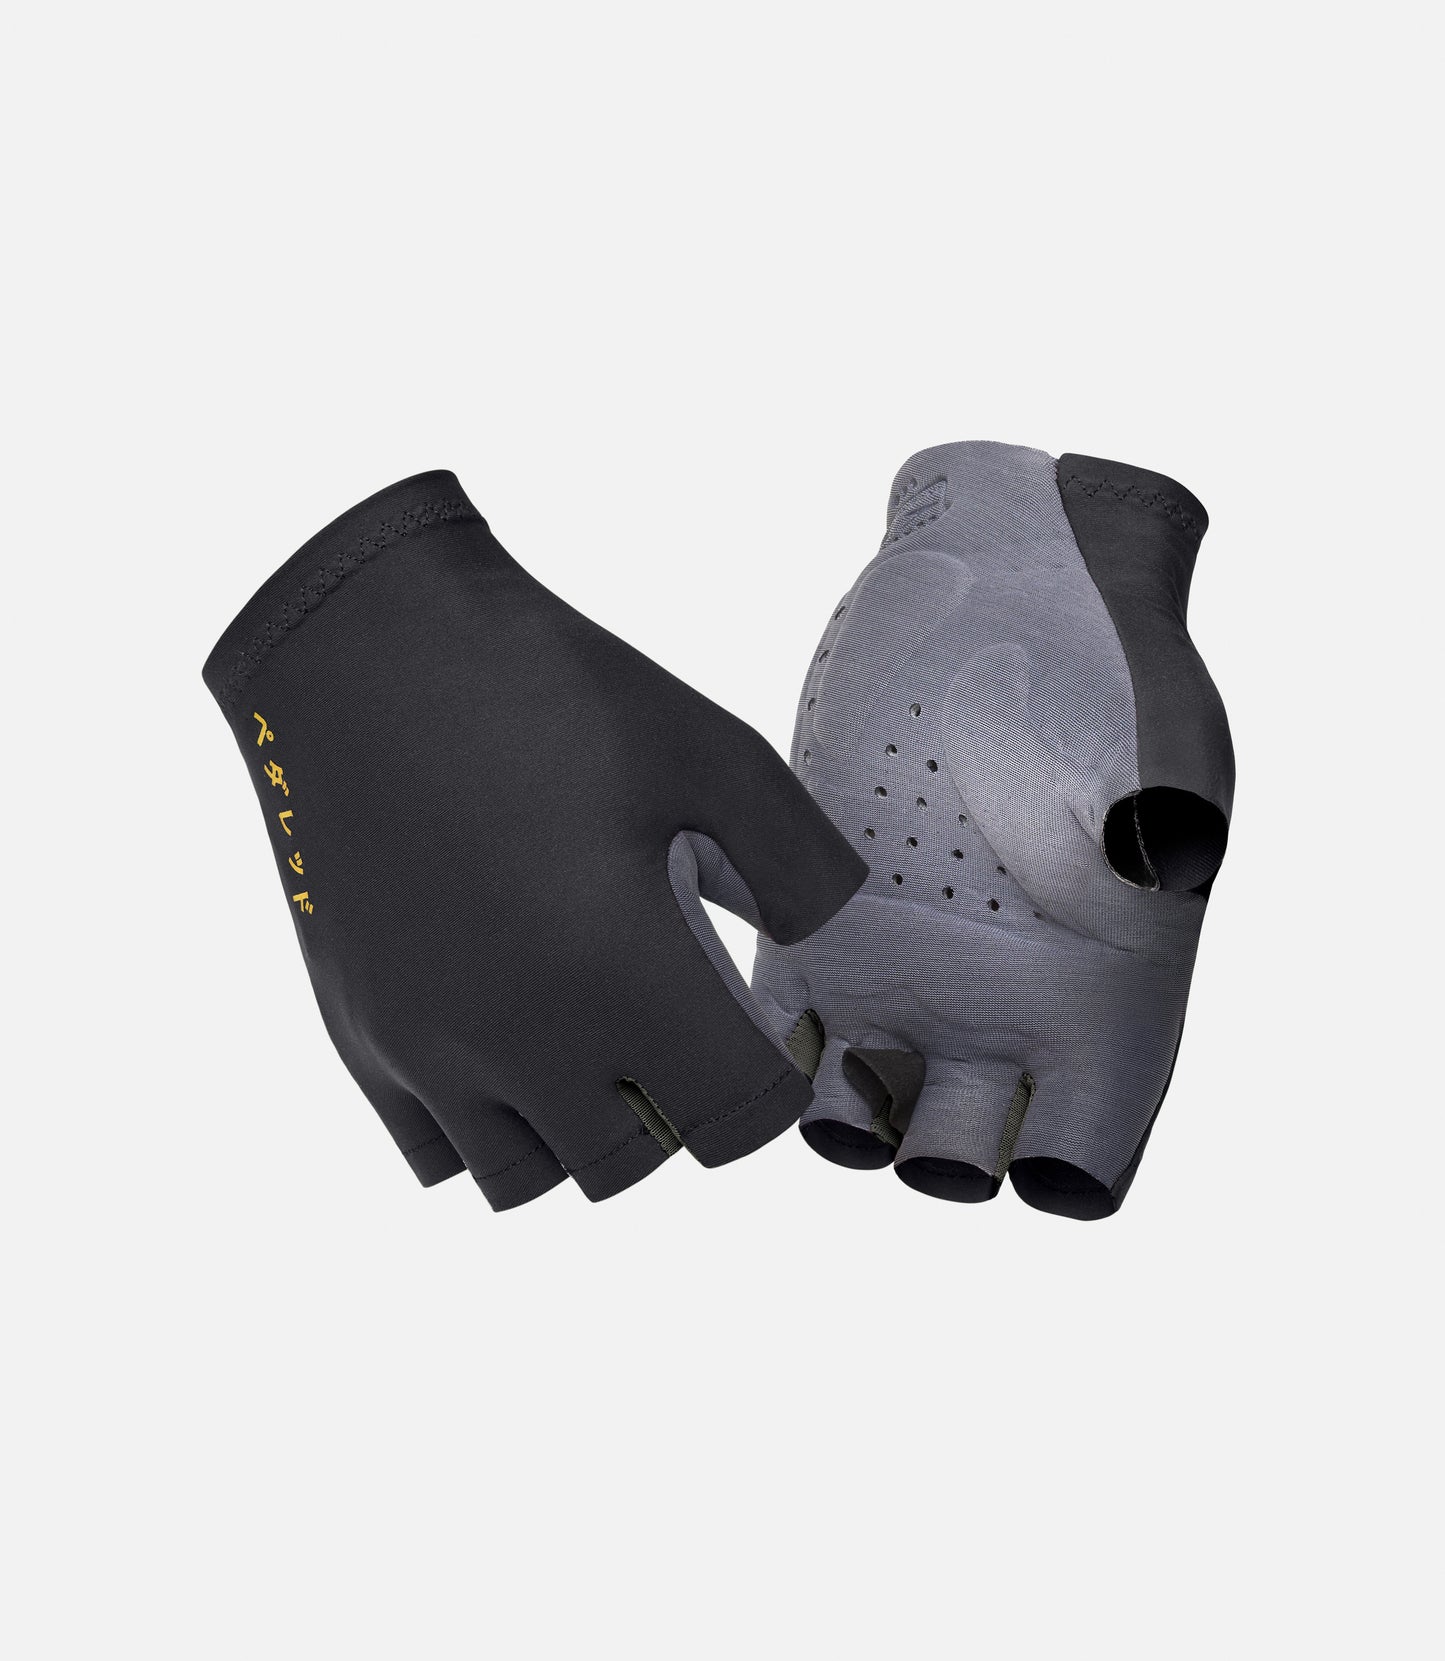 Pedaled Odyssey Elastic Interface Cycling Gloves